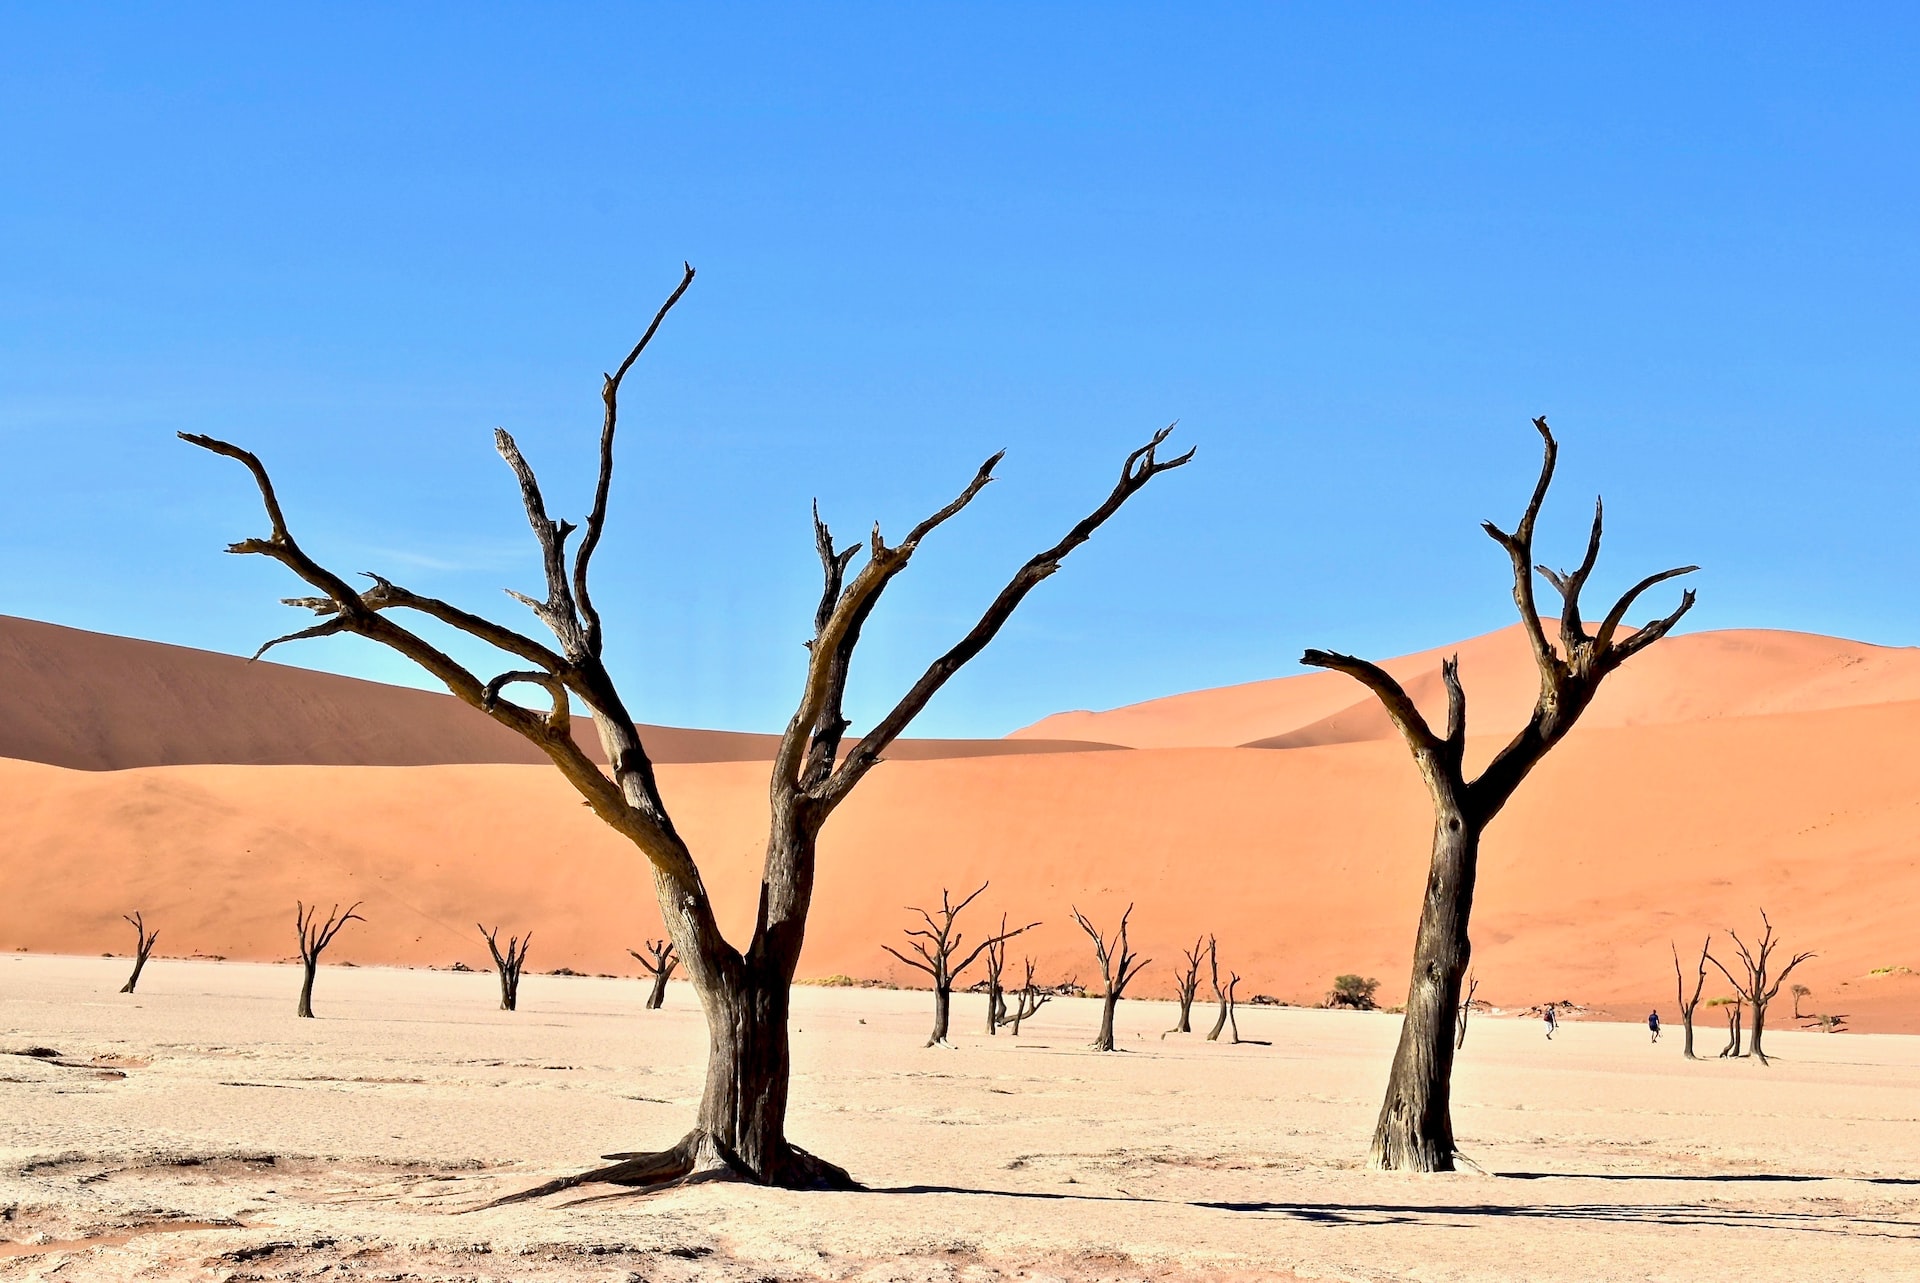 The Most Amusing Fun Facts About Deserts